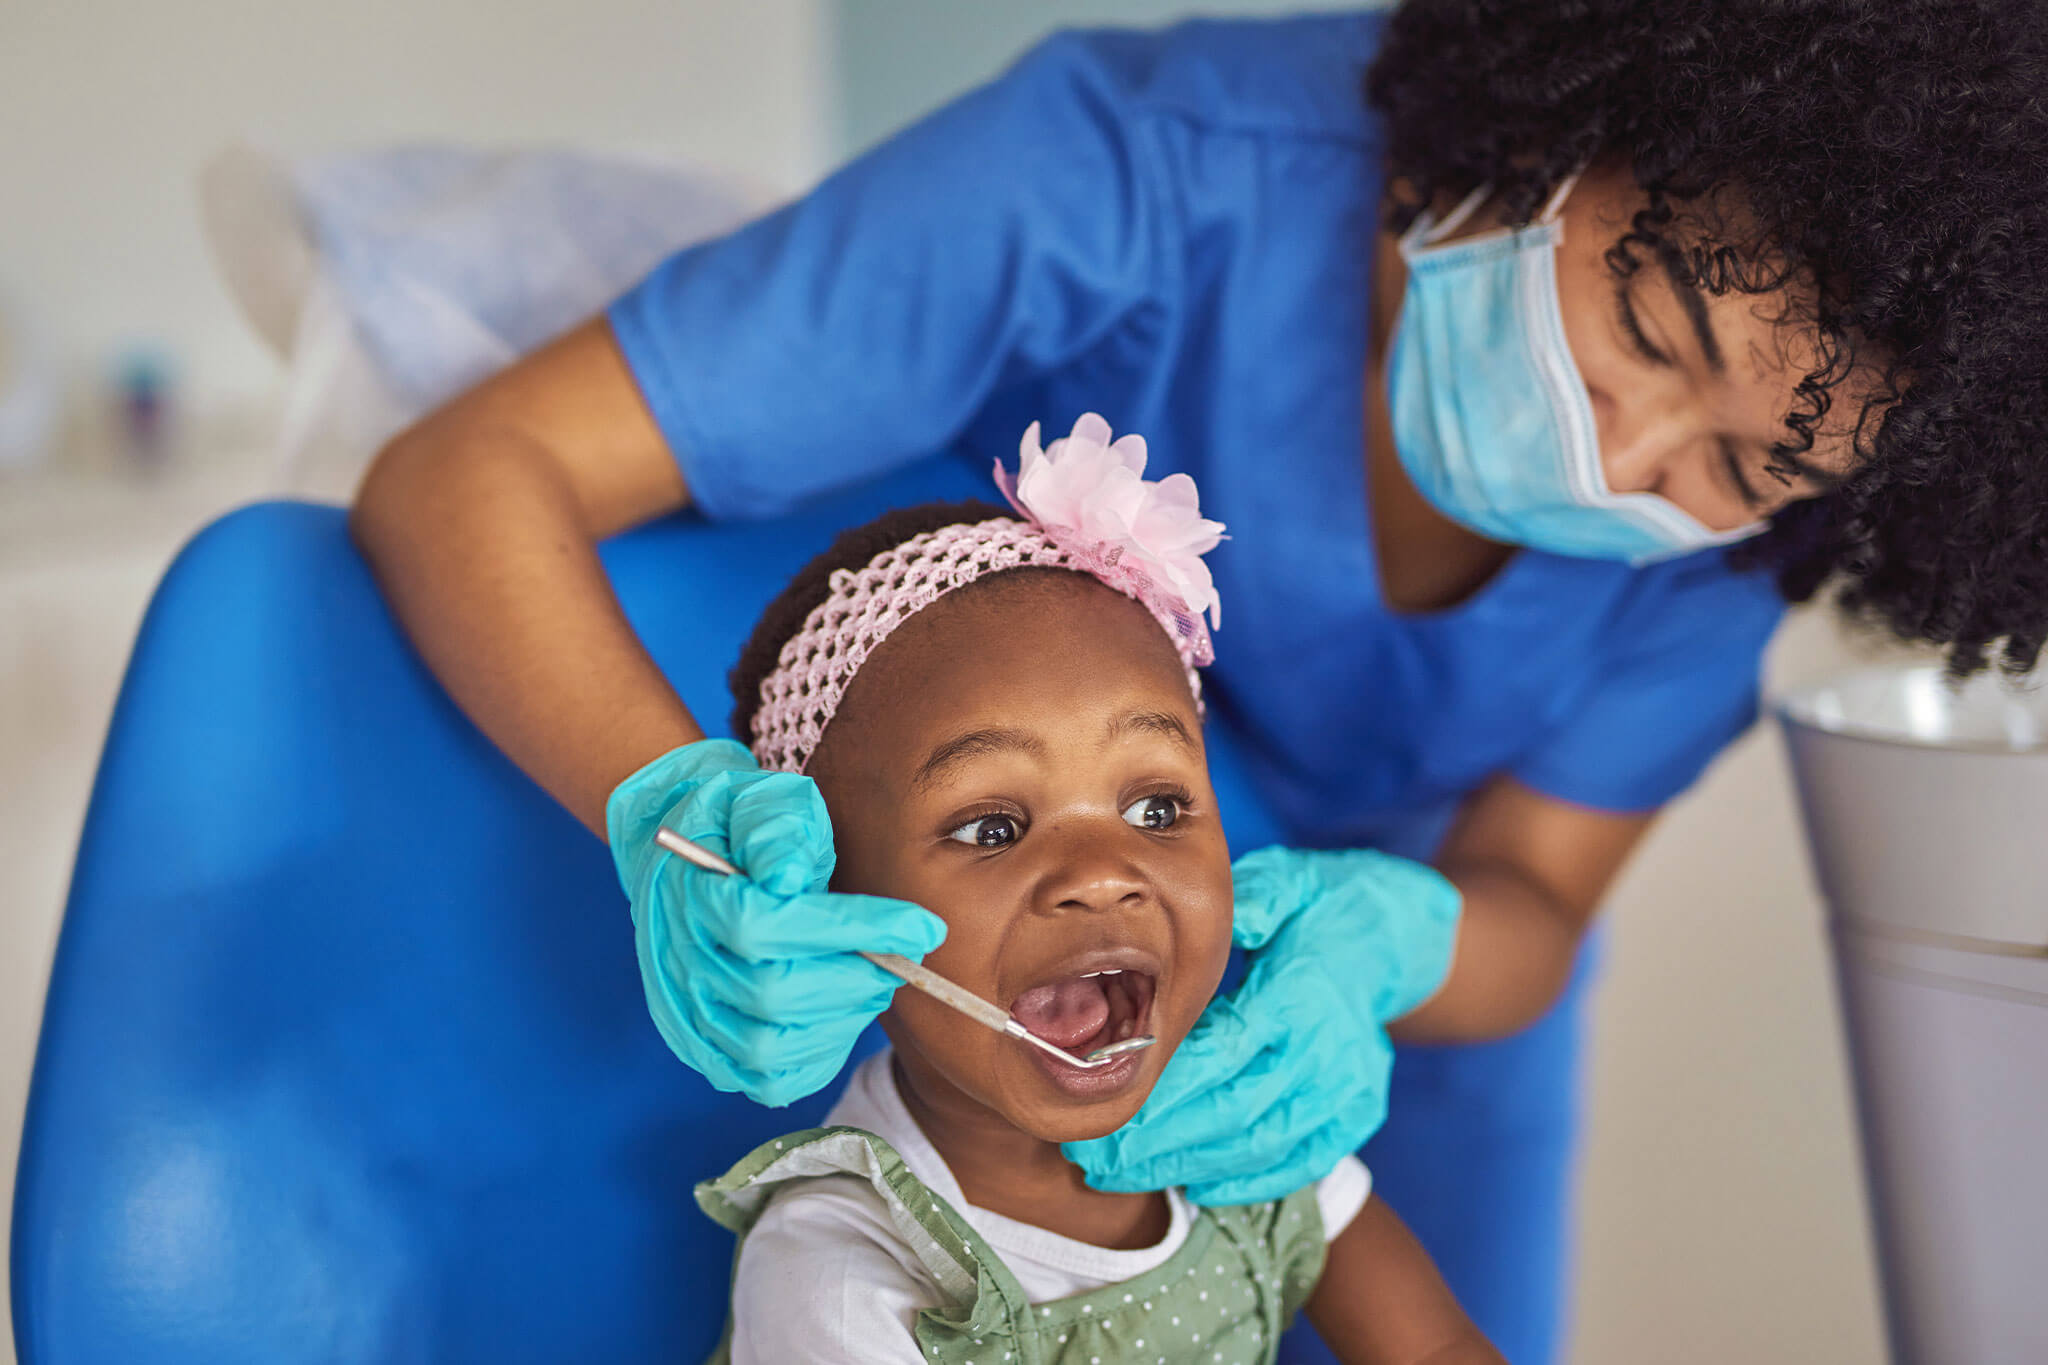 Child Dental Care Tips – How to Care for Your Child’s Teeth